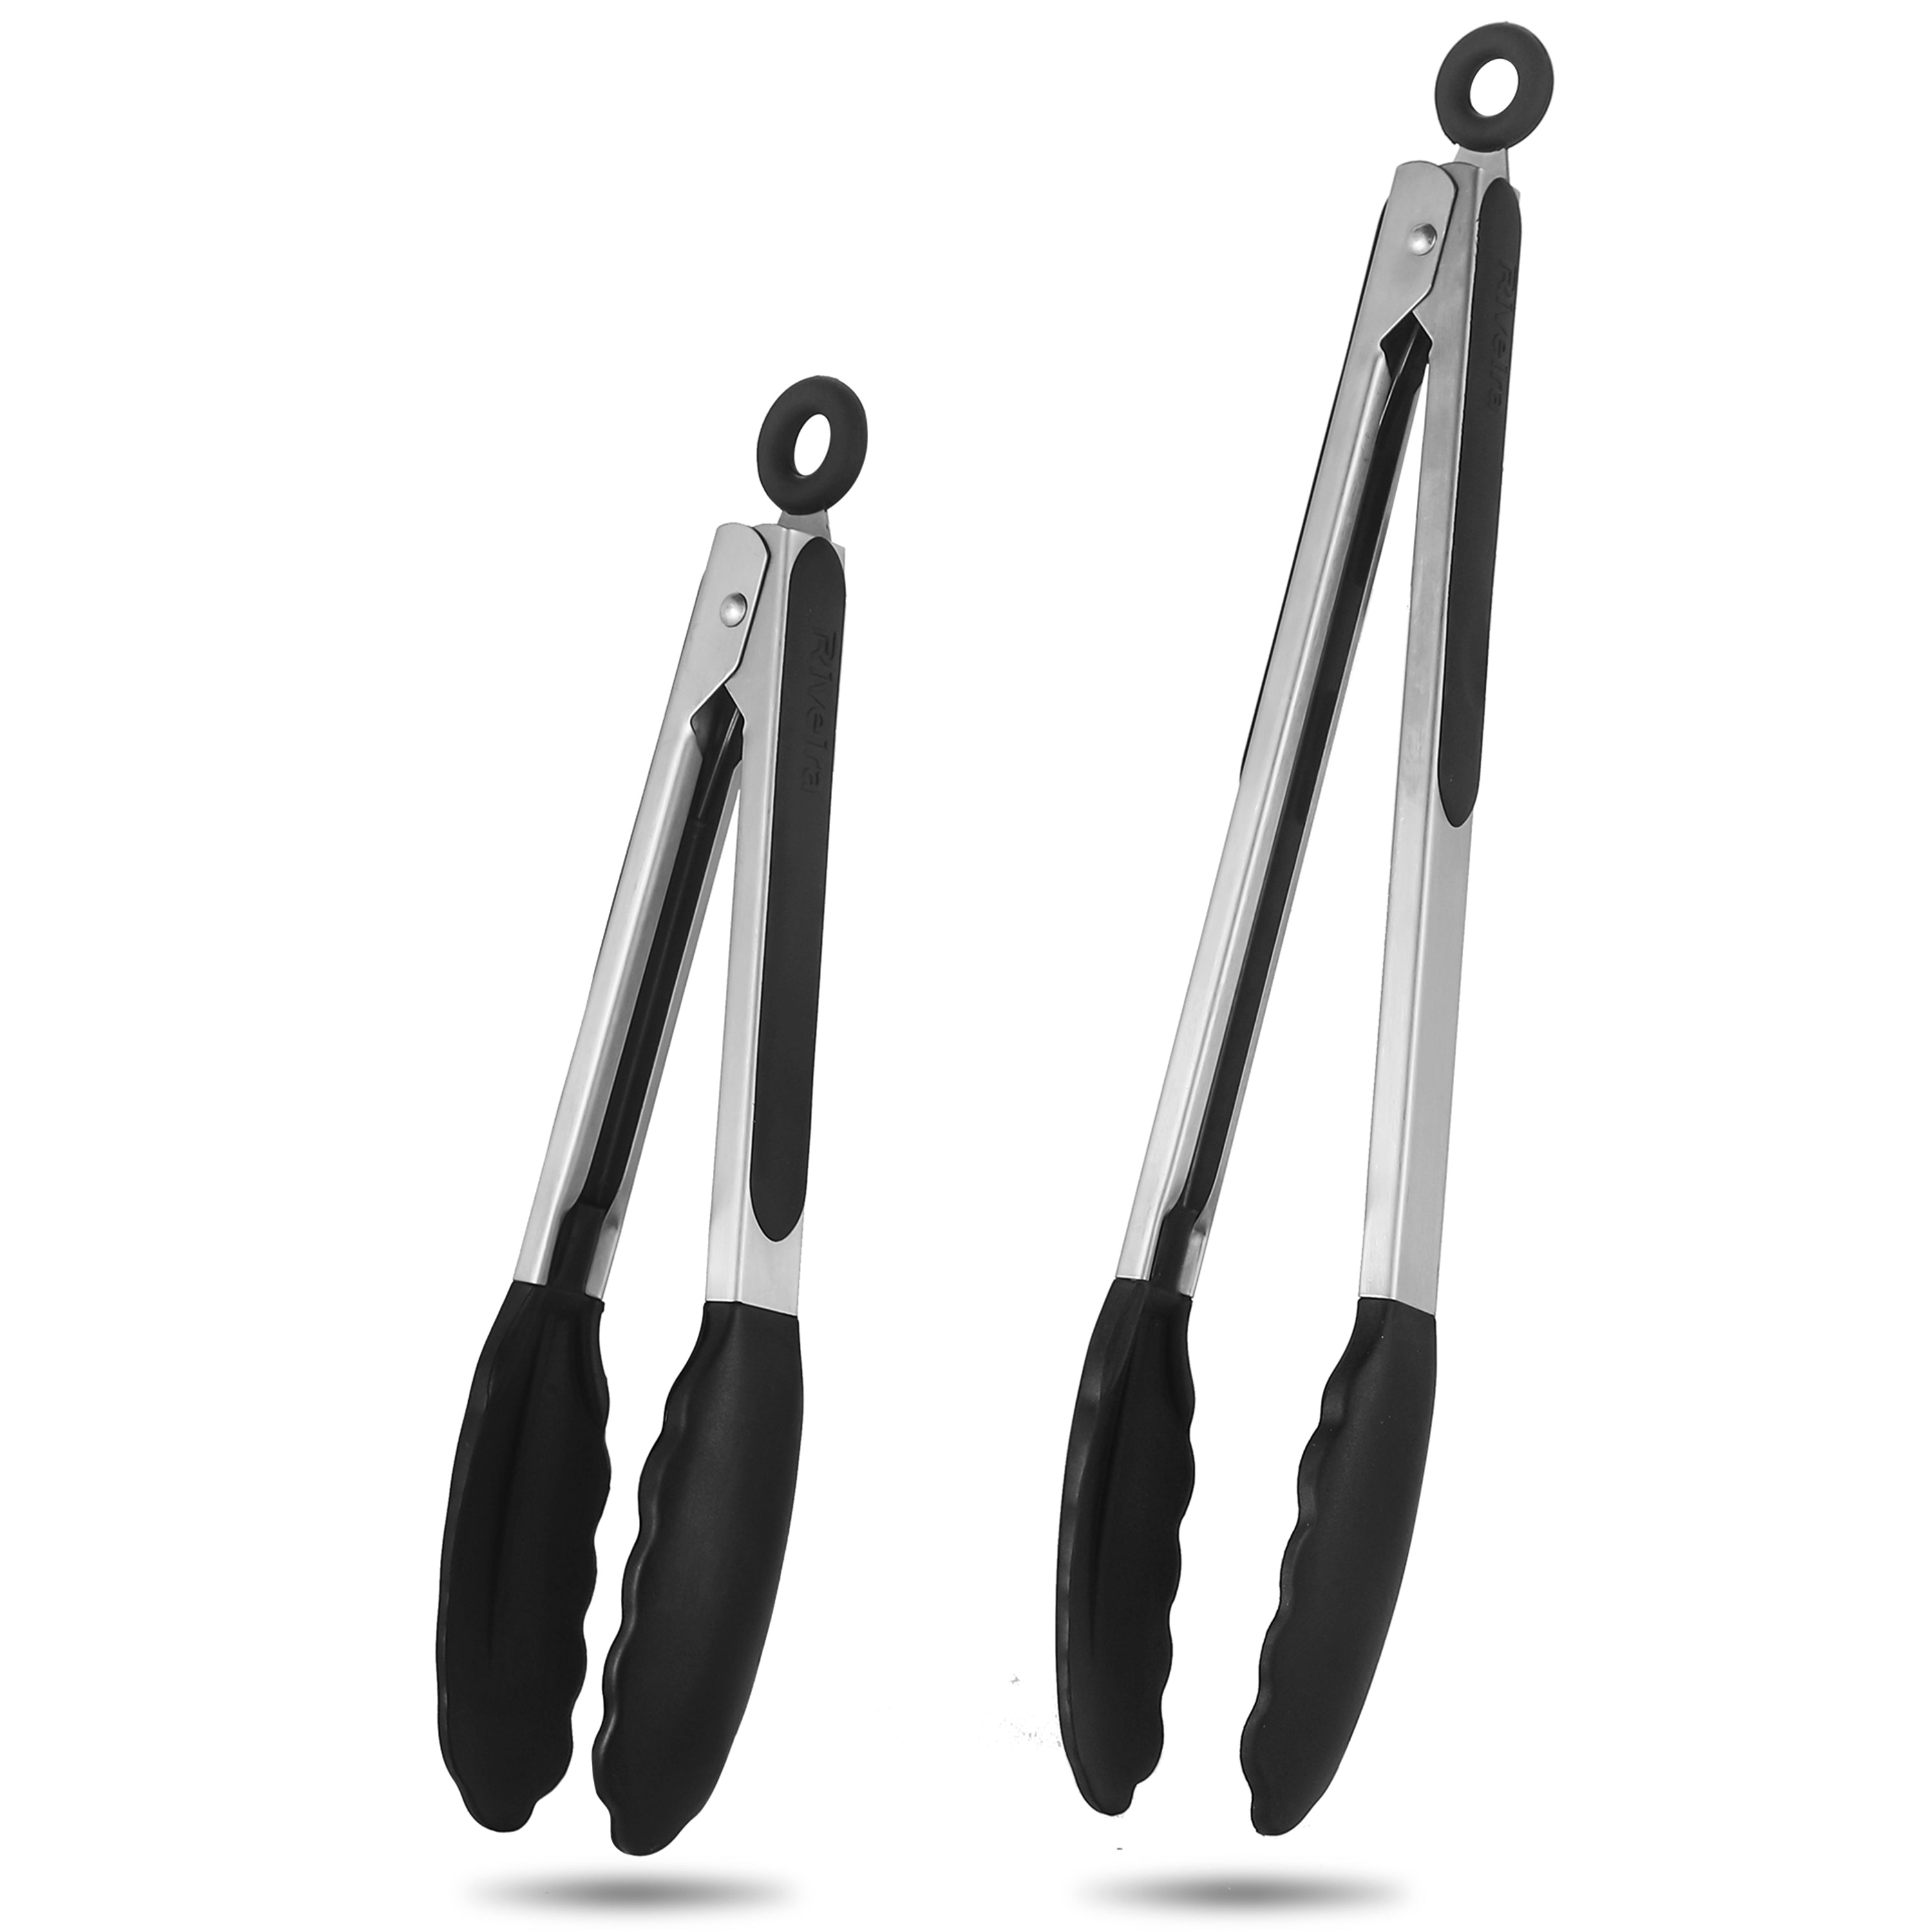 Riveira Tongs for Cooking with Silicone Tips | 9 and 12-Inch Pieces Set | Non-Stick Kitchen Grill Tongs | BBQ Grilling Tong | 550°F High Heat-Resistant Premium Silicone Tips | 304 Stainless Steel